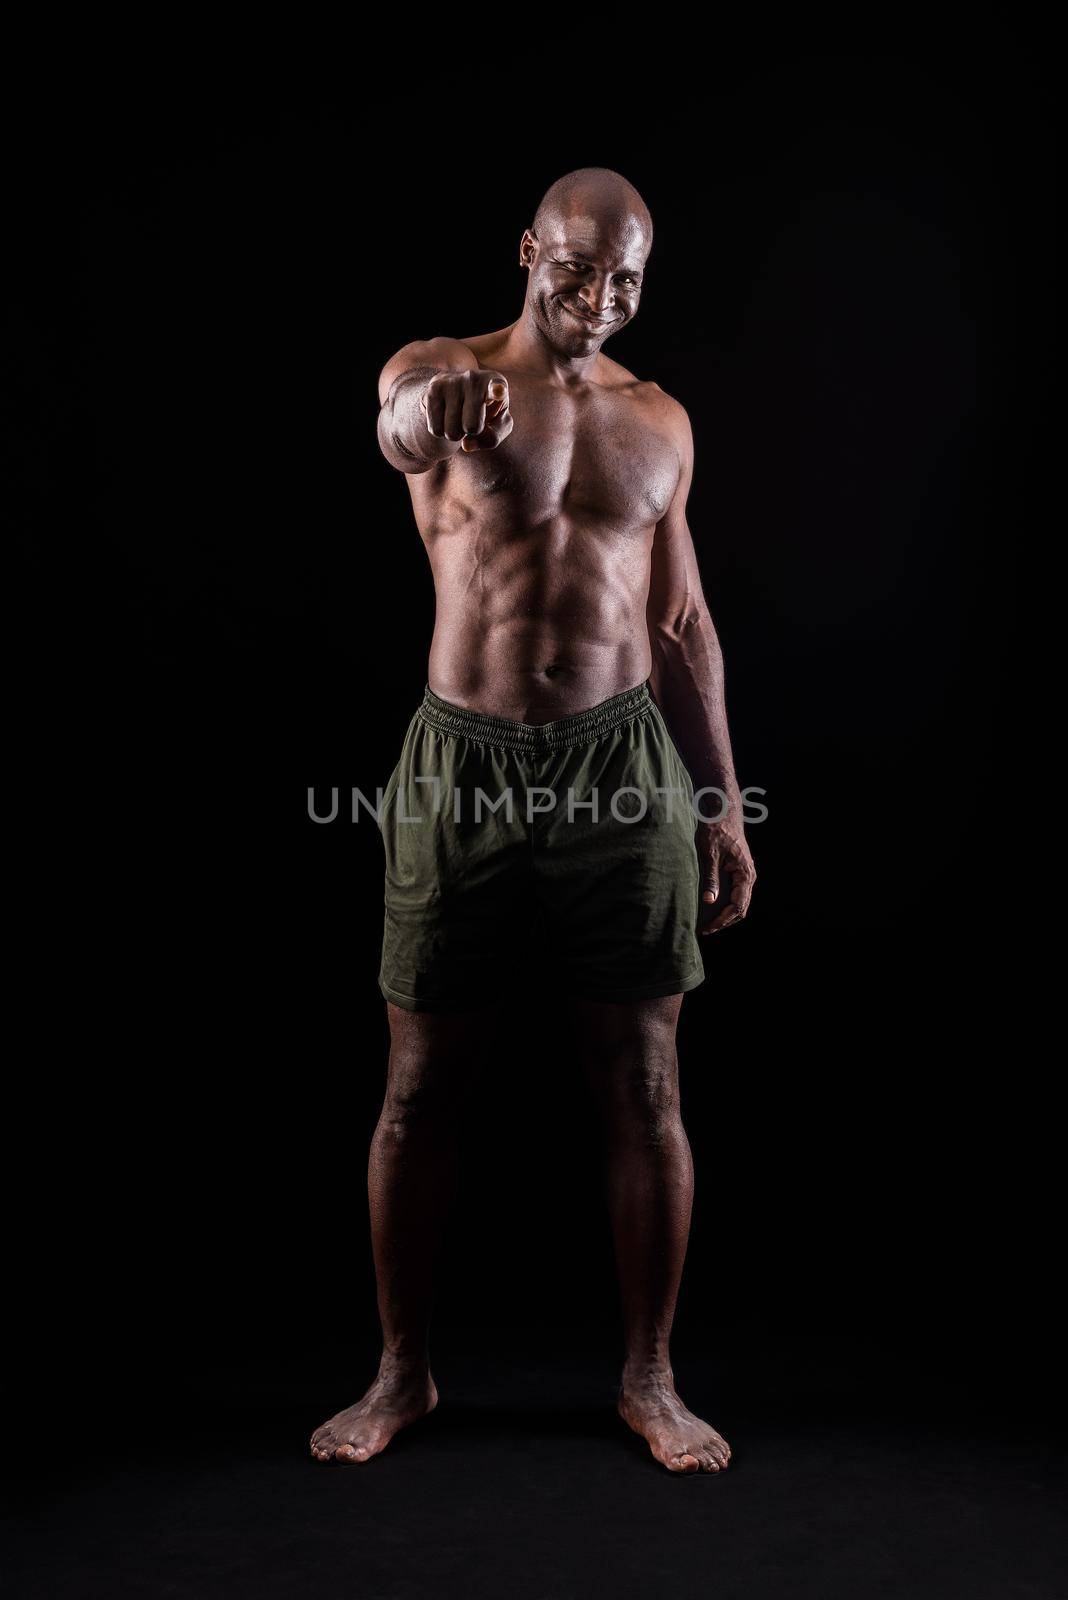 African american muscular man smiling standing and pointing at camera on a black background. Bodybuilder with bare torso wearing shorts in studio.